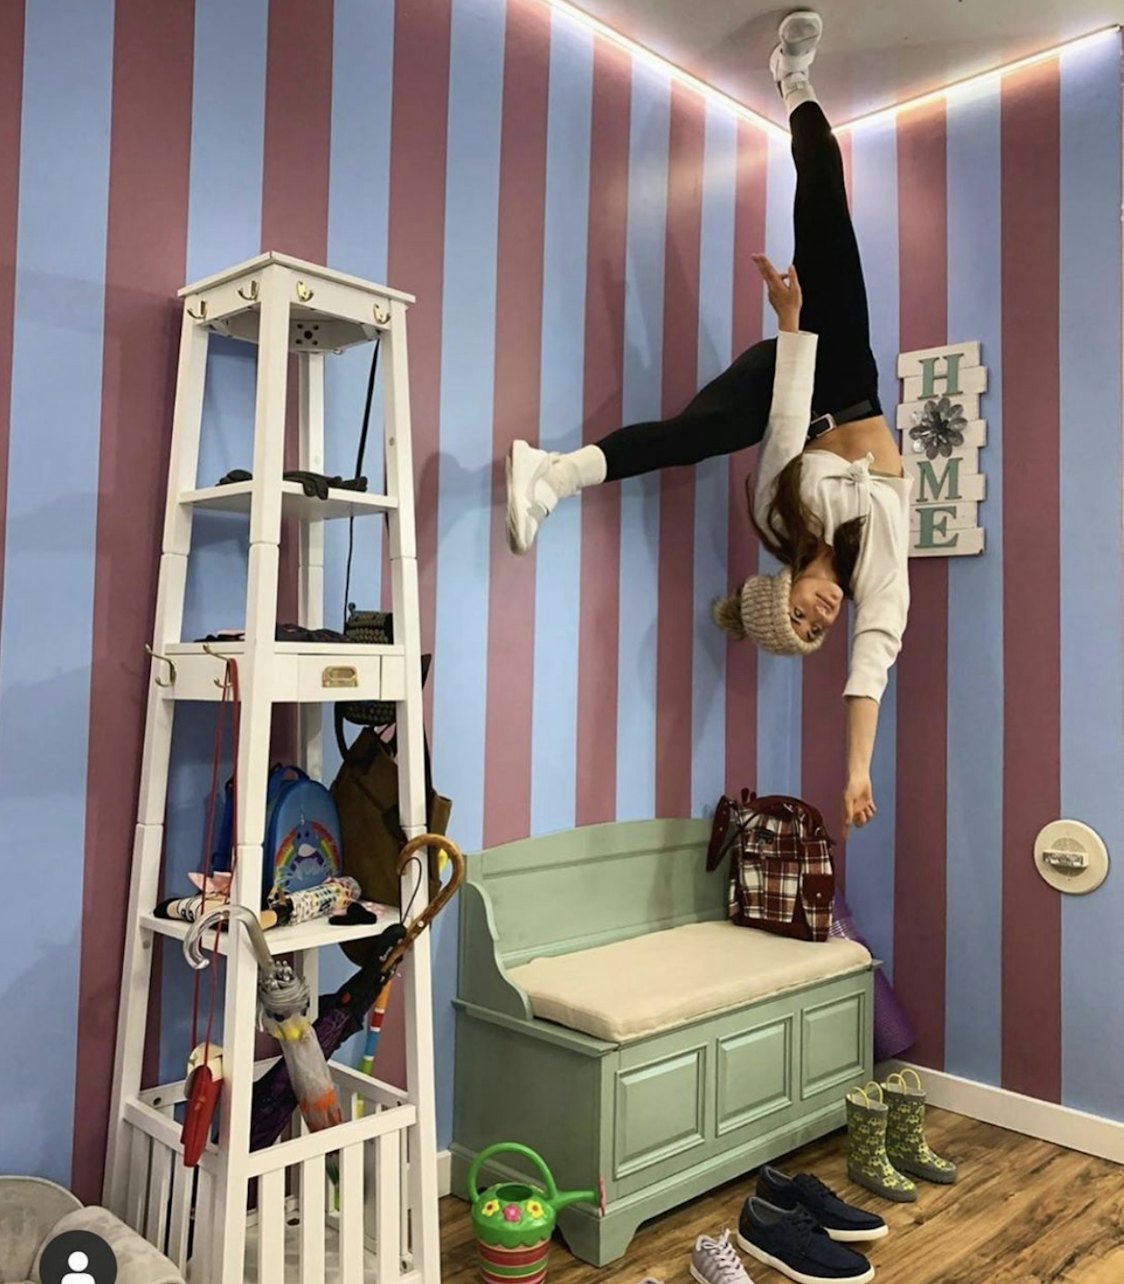 The Upside Down House at World of Illusions - Alloggi in Los Angeles